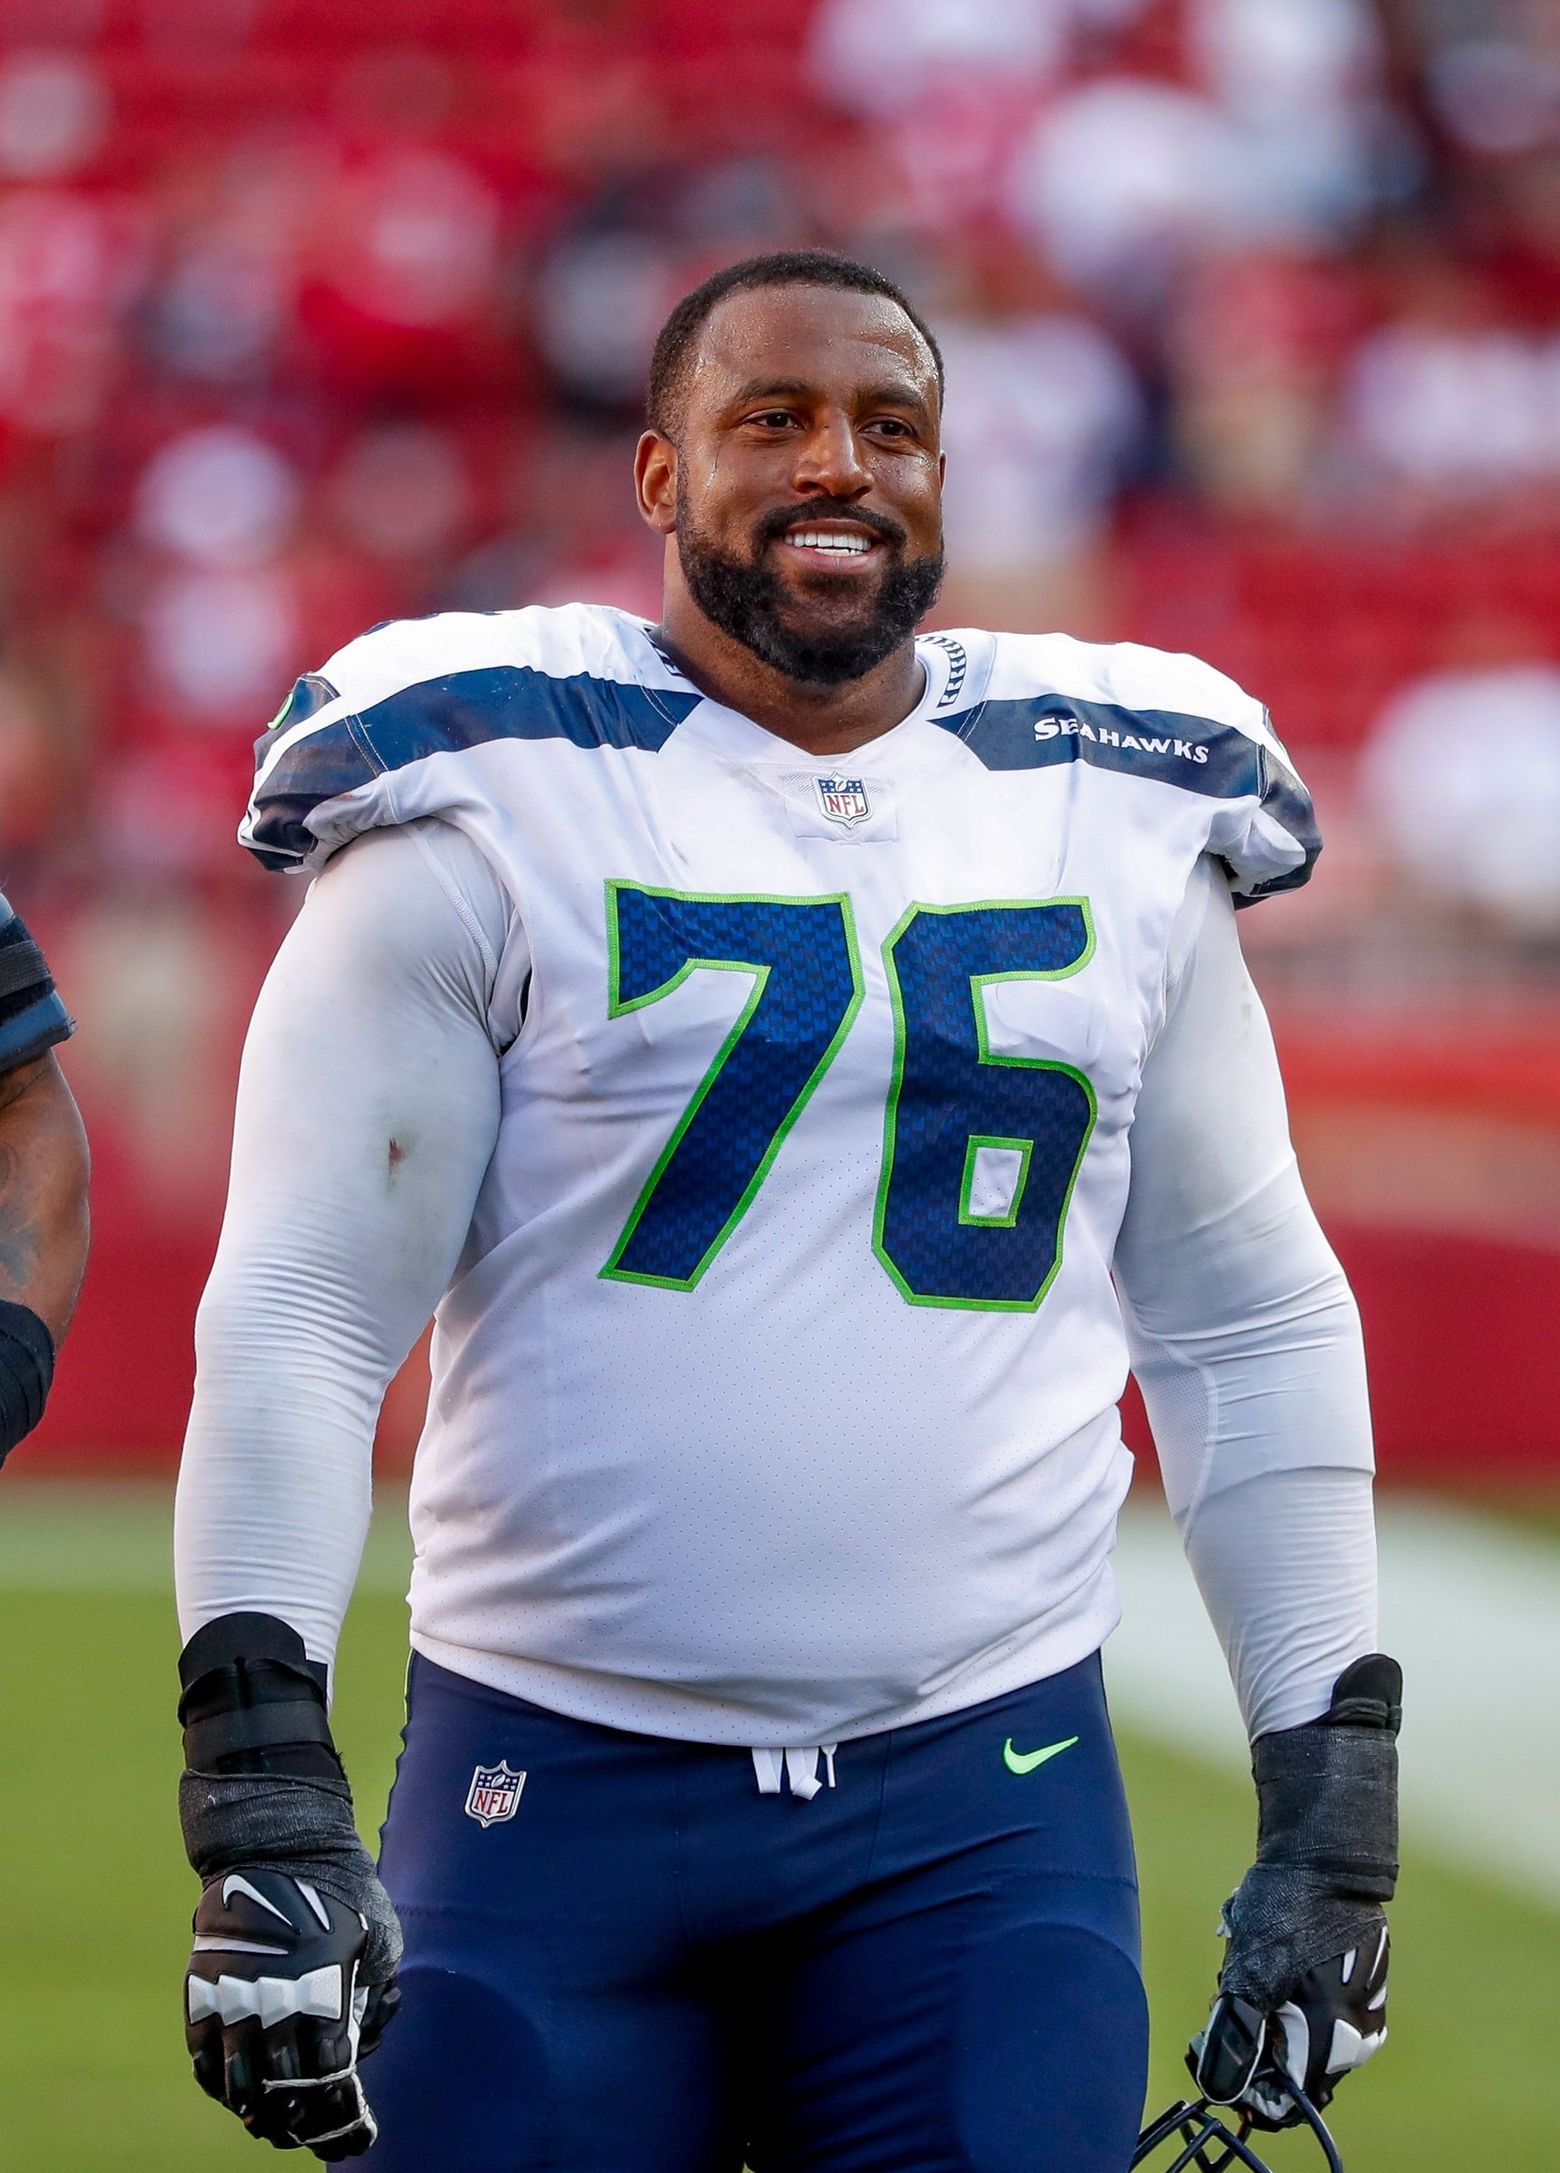 Mailbag: Will Seahawks bring back Duane Brown, and how can they